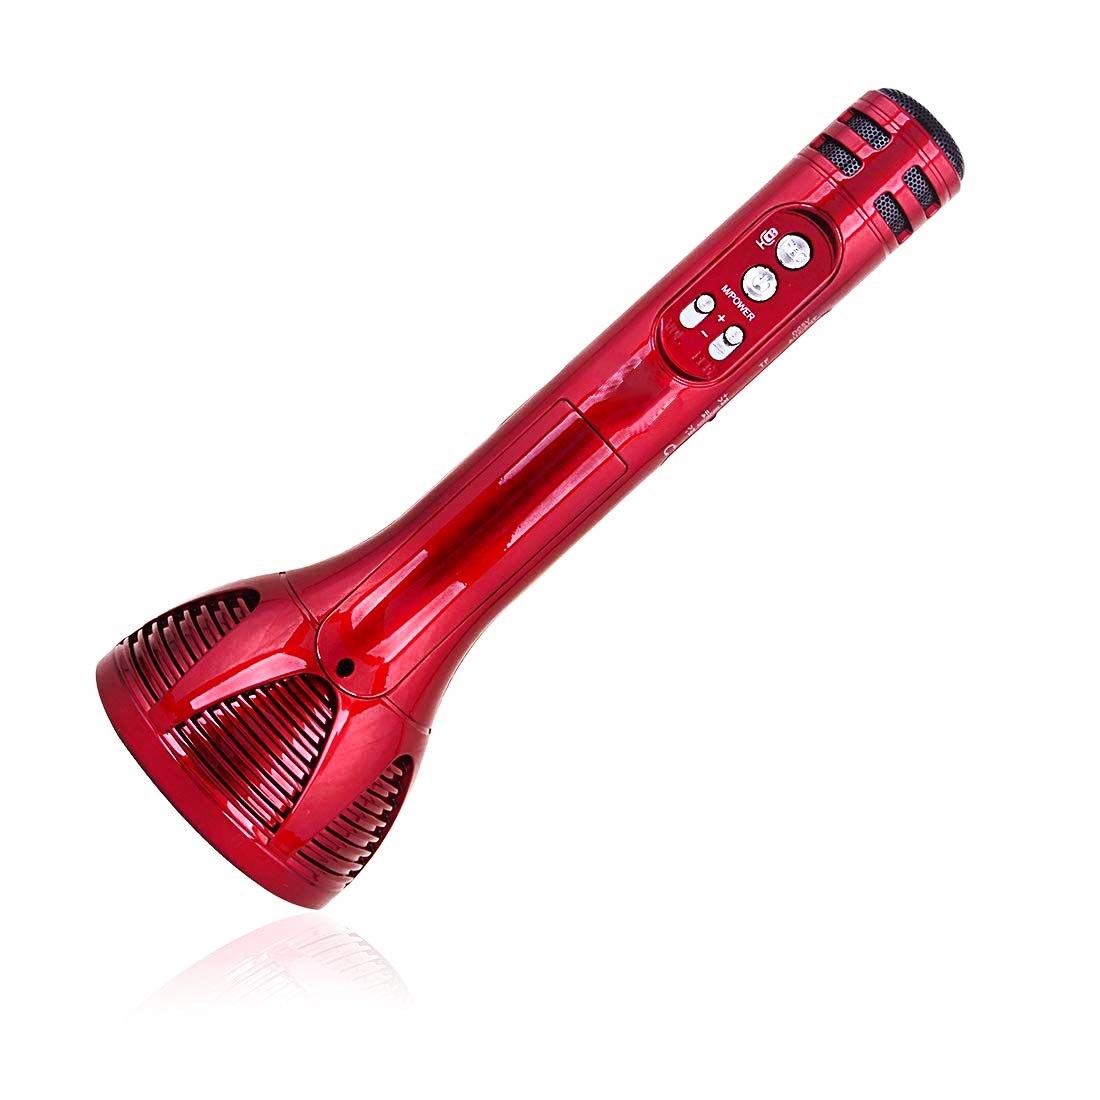 An electric red bluetooth microphone for Karaoke